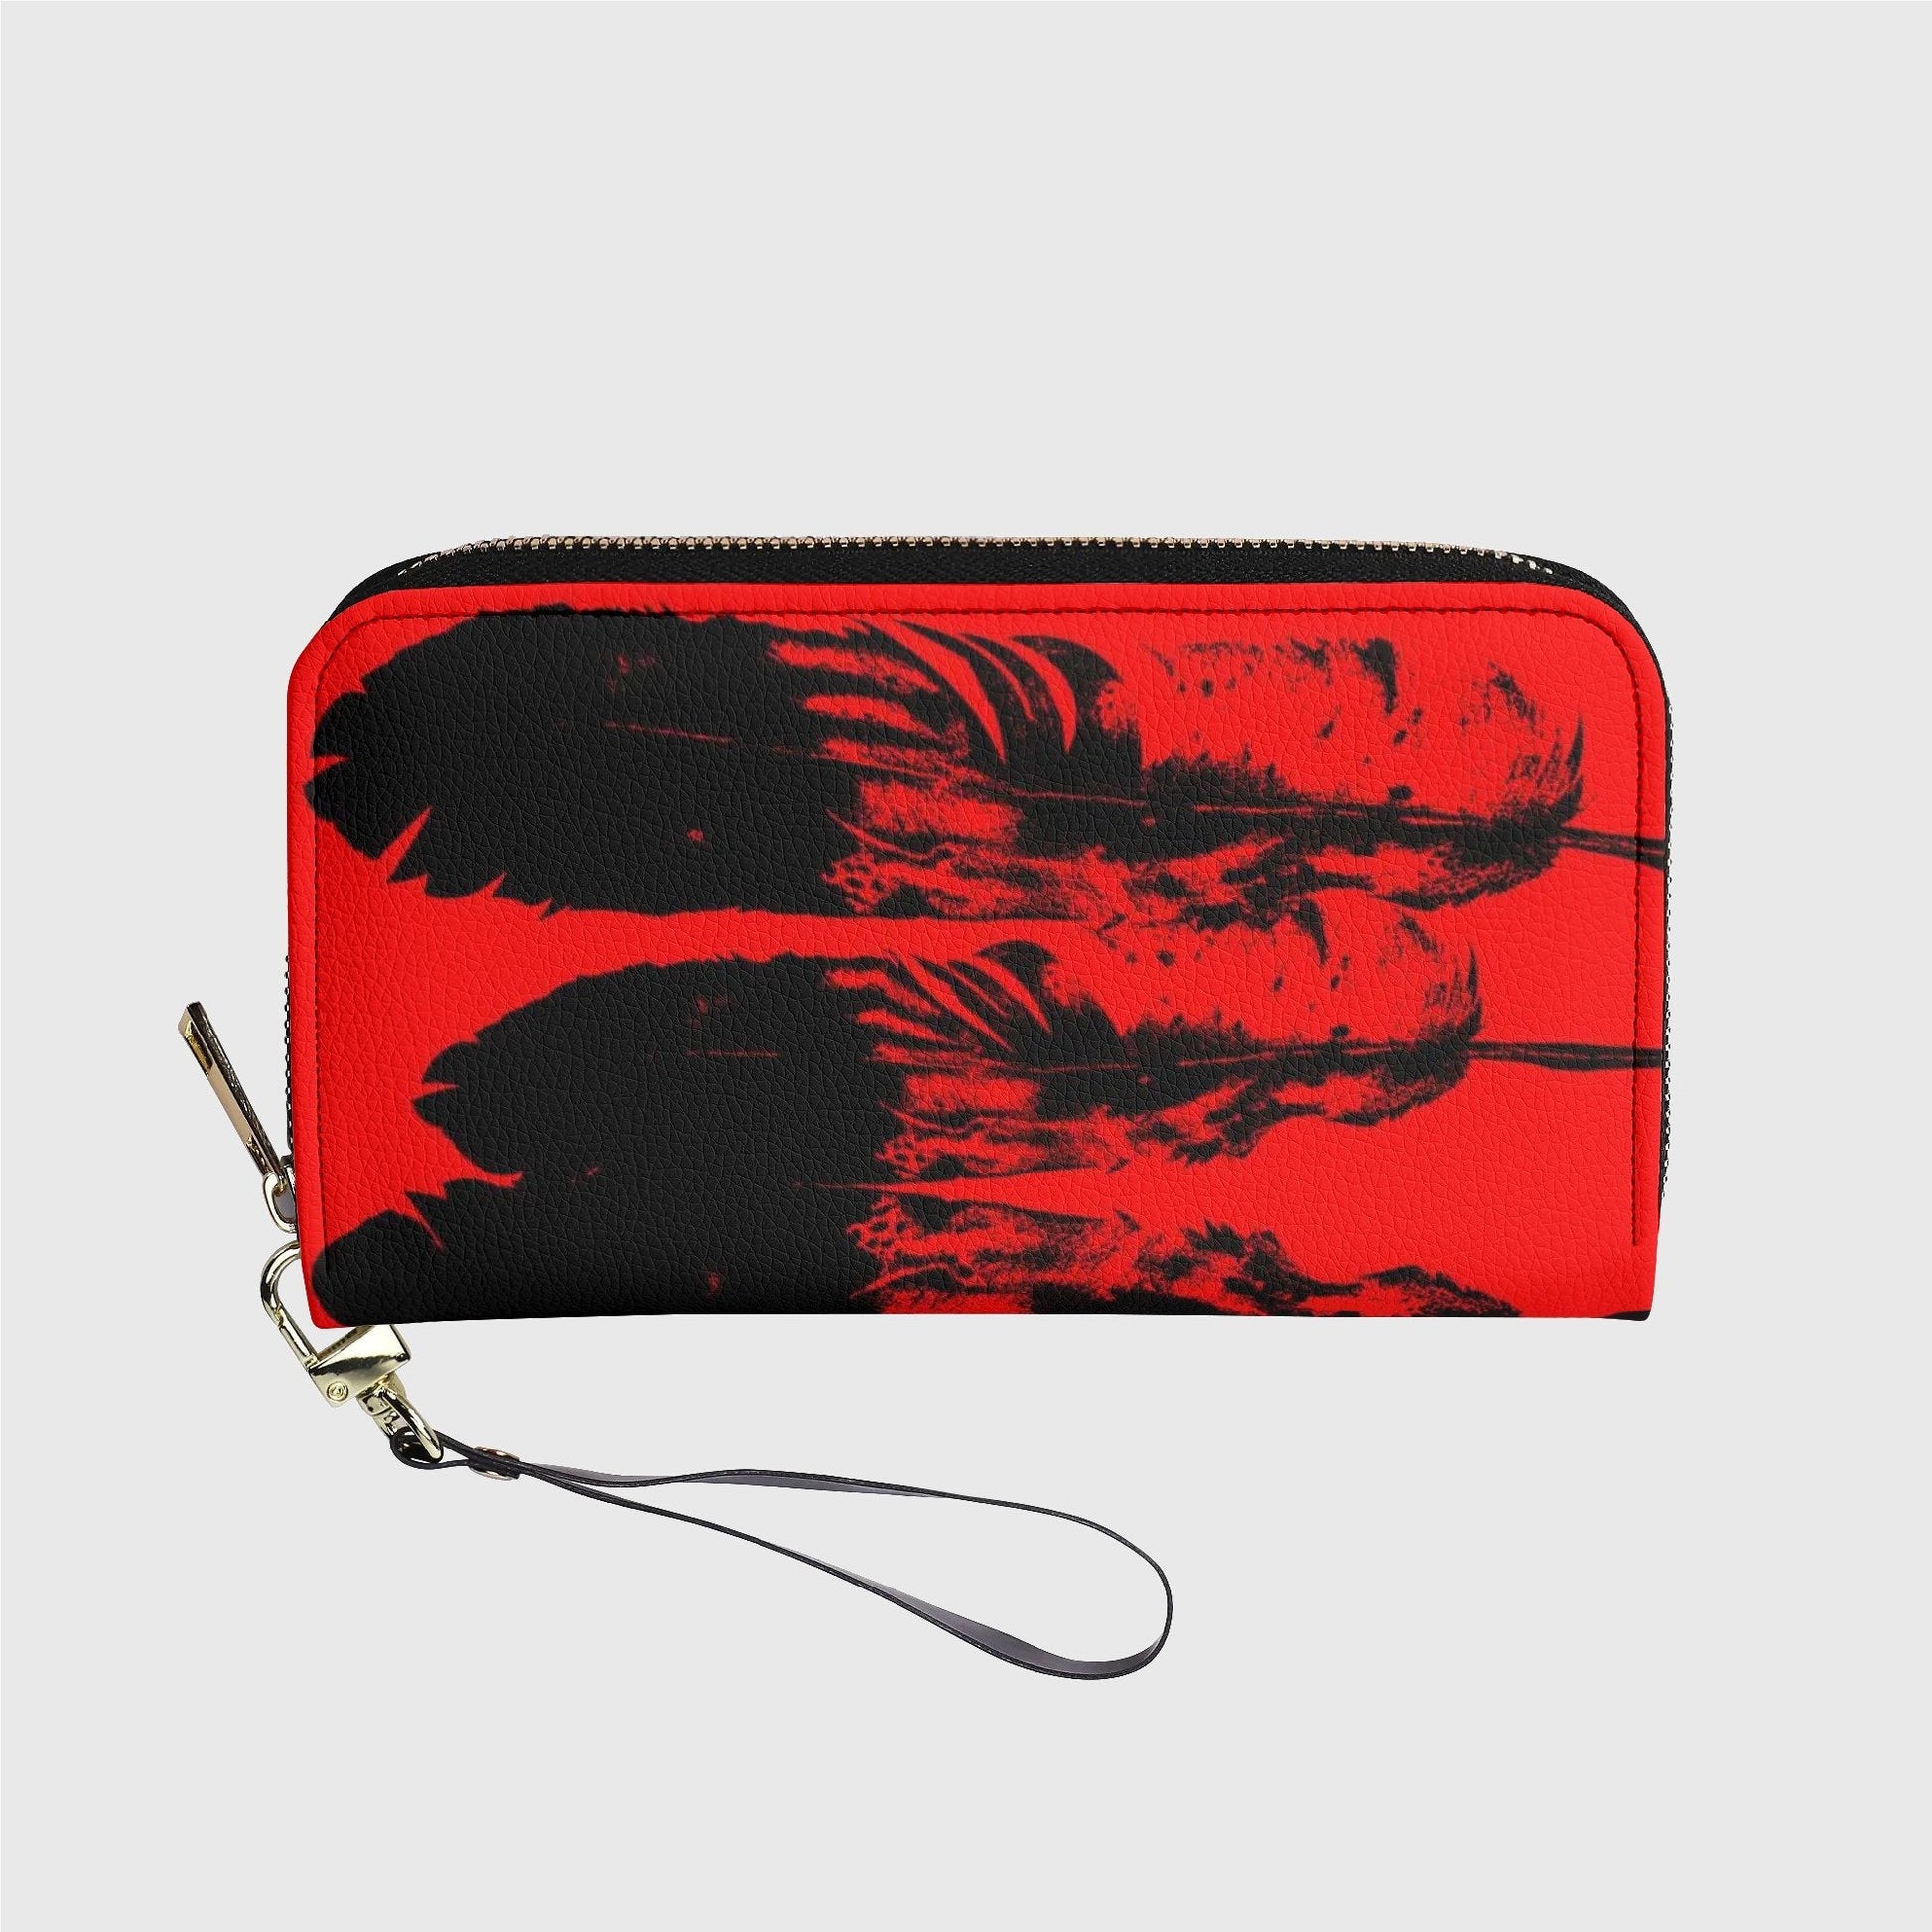 red*indigenous*native*american*eagle*feather*zipper*wallet*women's